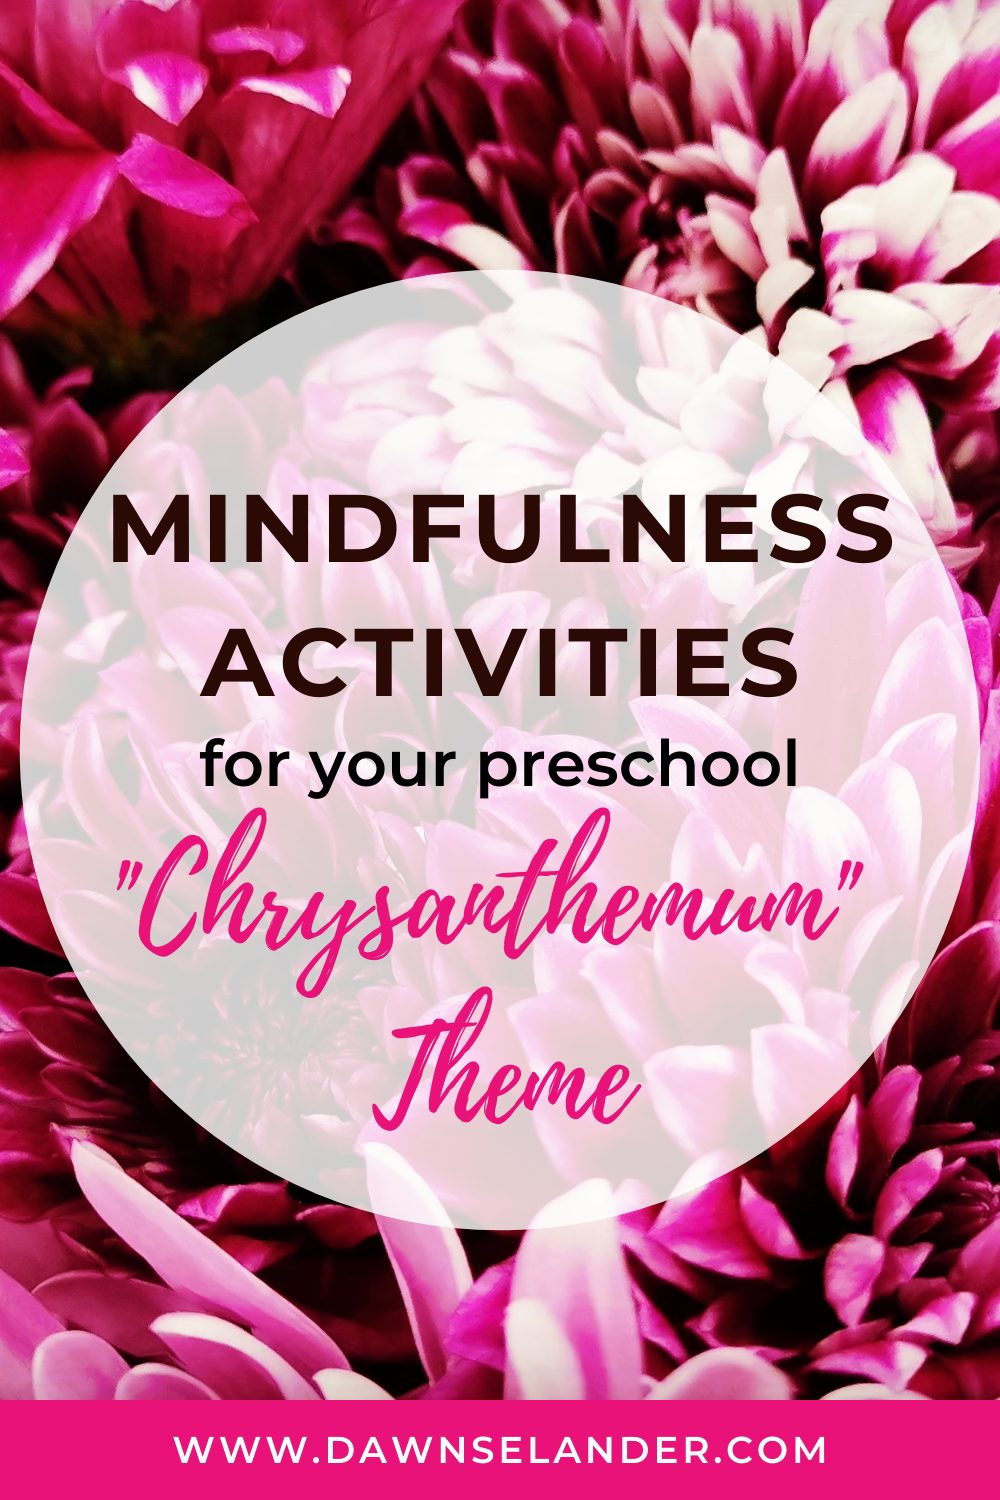 Mindfulness Activities for Your "Chrysanthemum" Theme